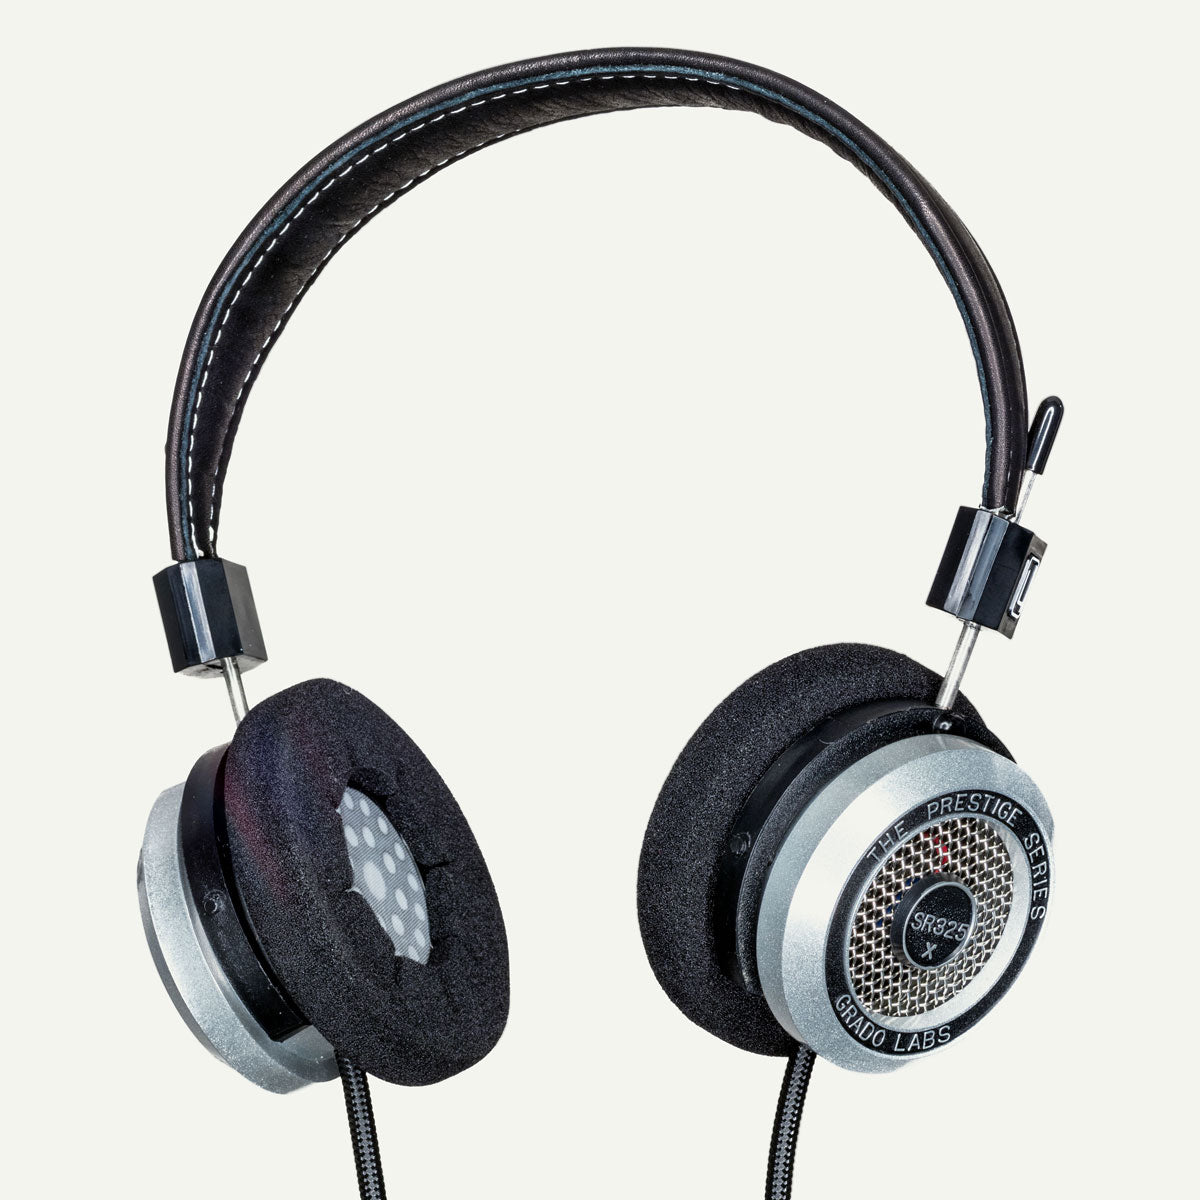 GRADO SR325x Stereo Headphones, Wired, Dynamic Drivers, Open Back Design, angled